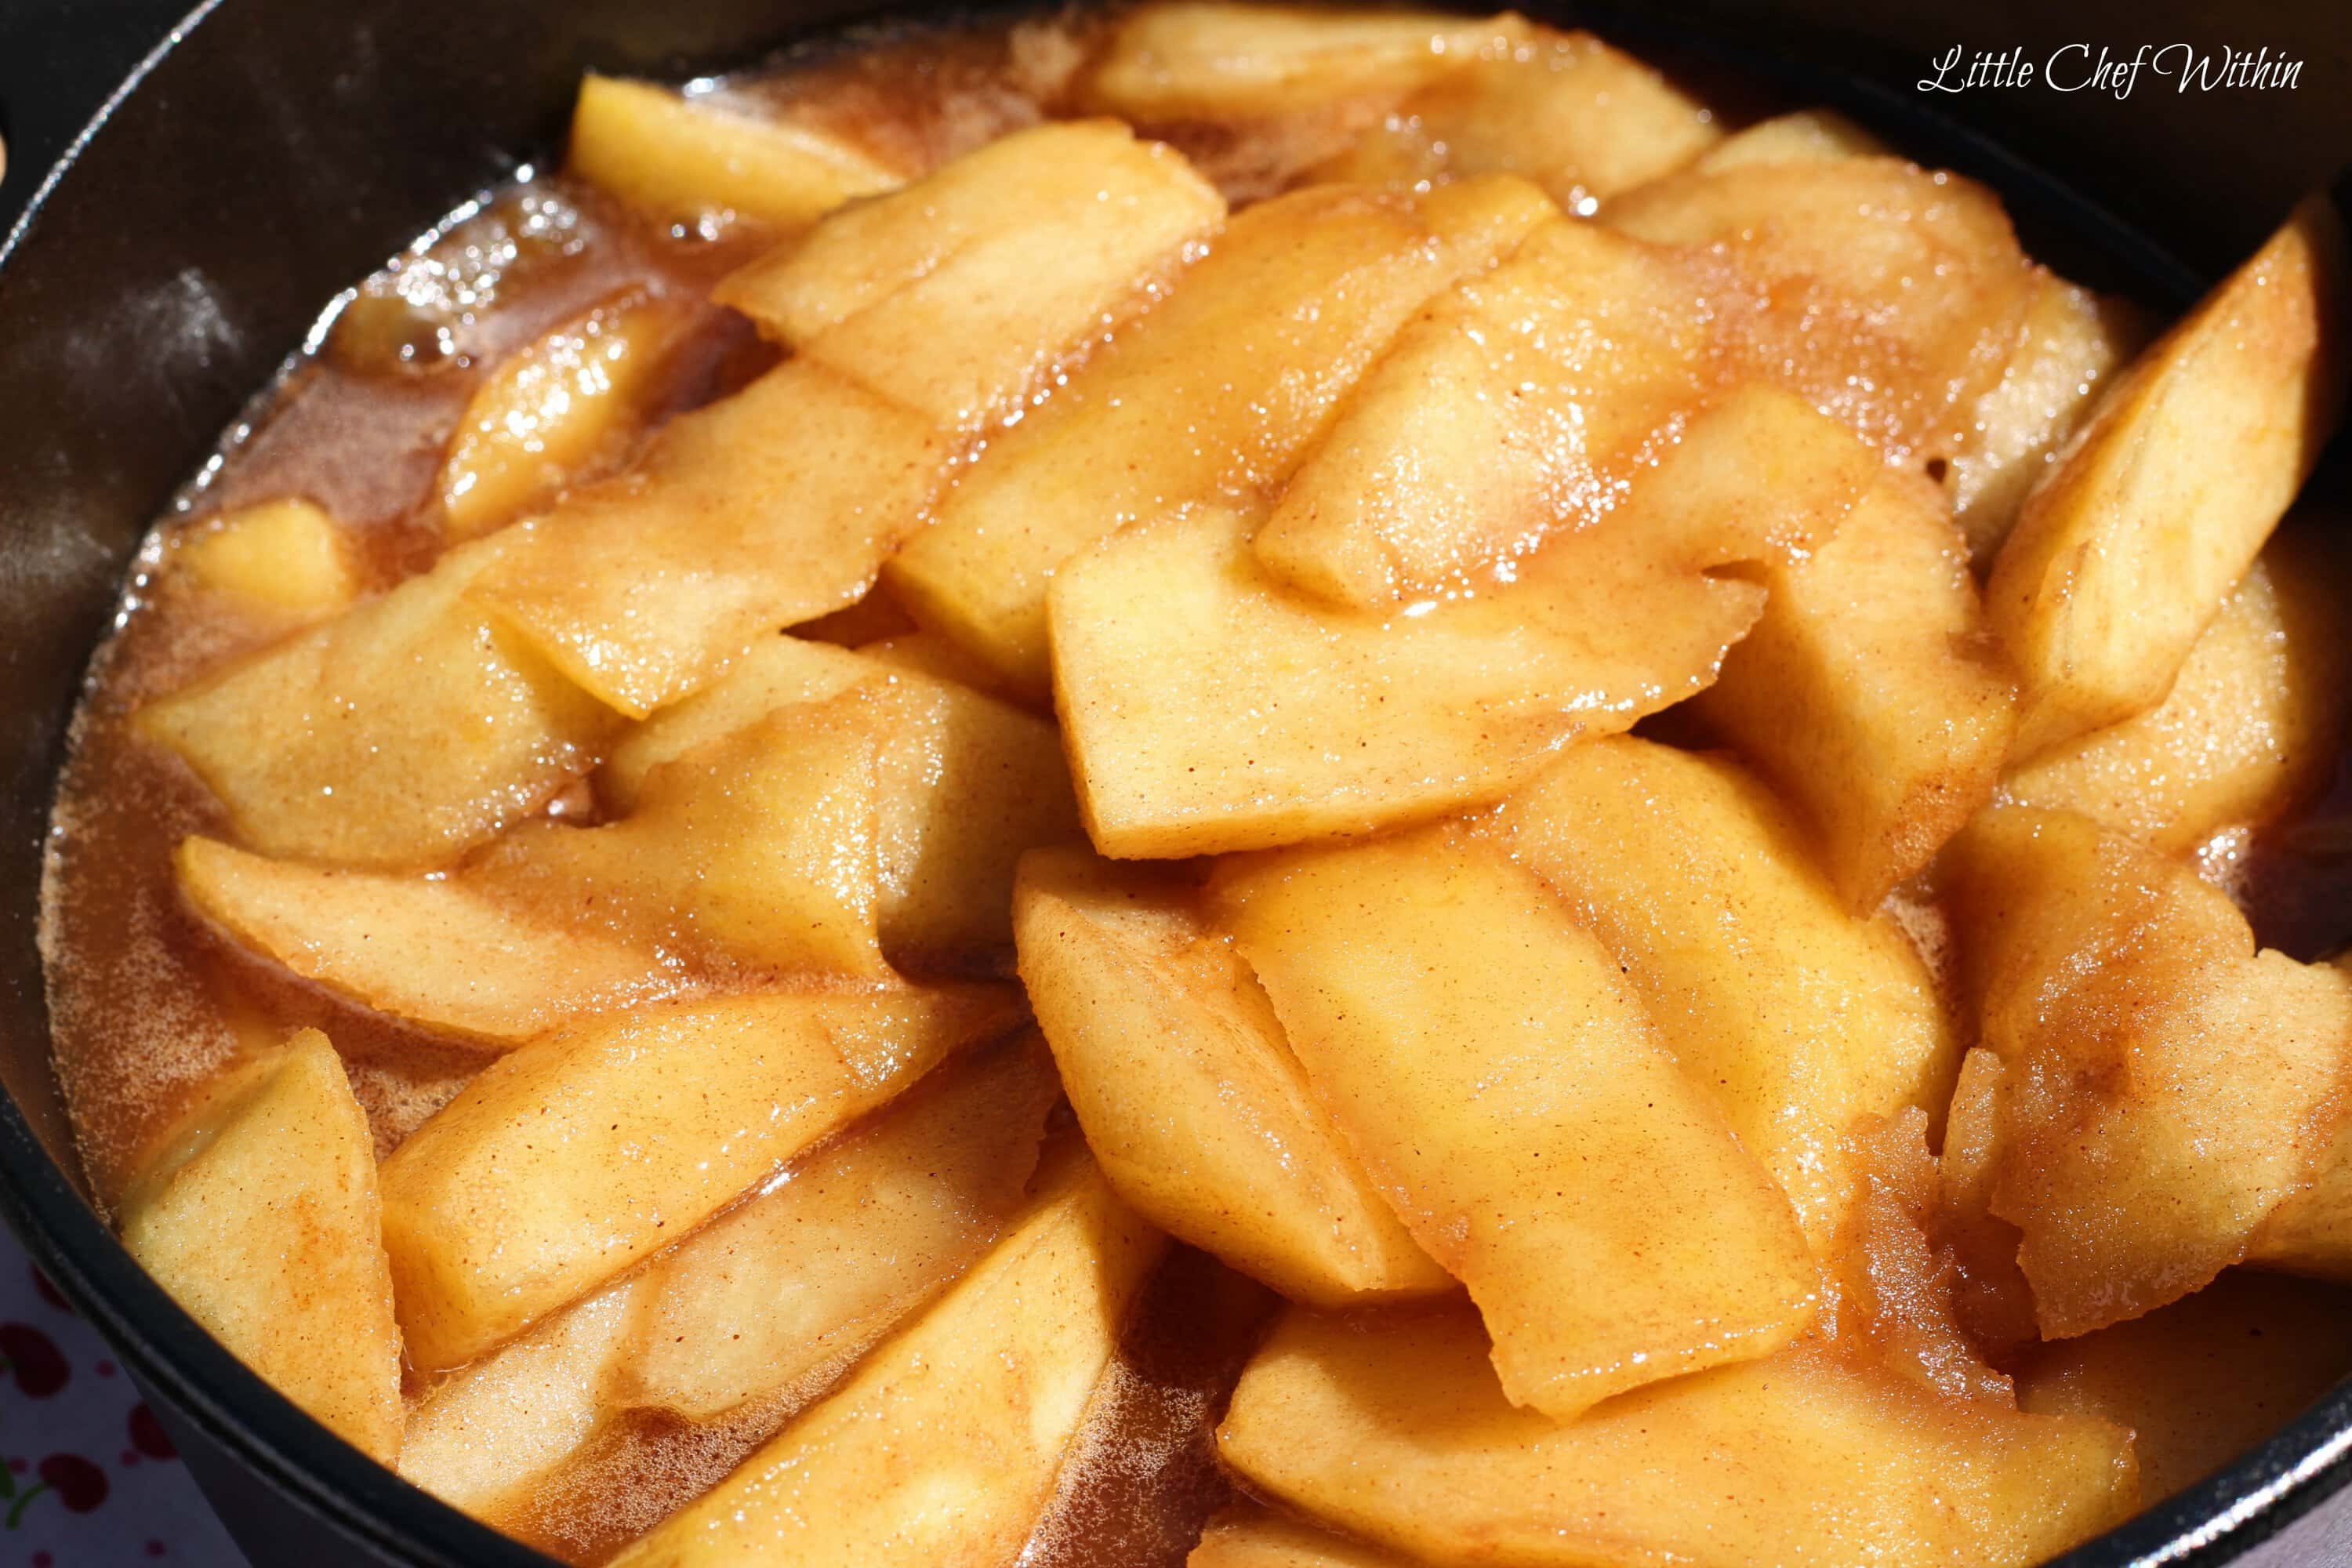 sliced apples cooked in butter in a cast iron skilled